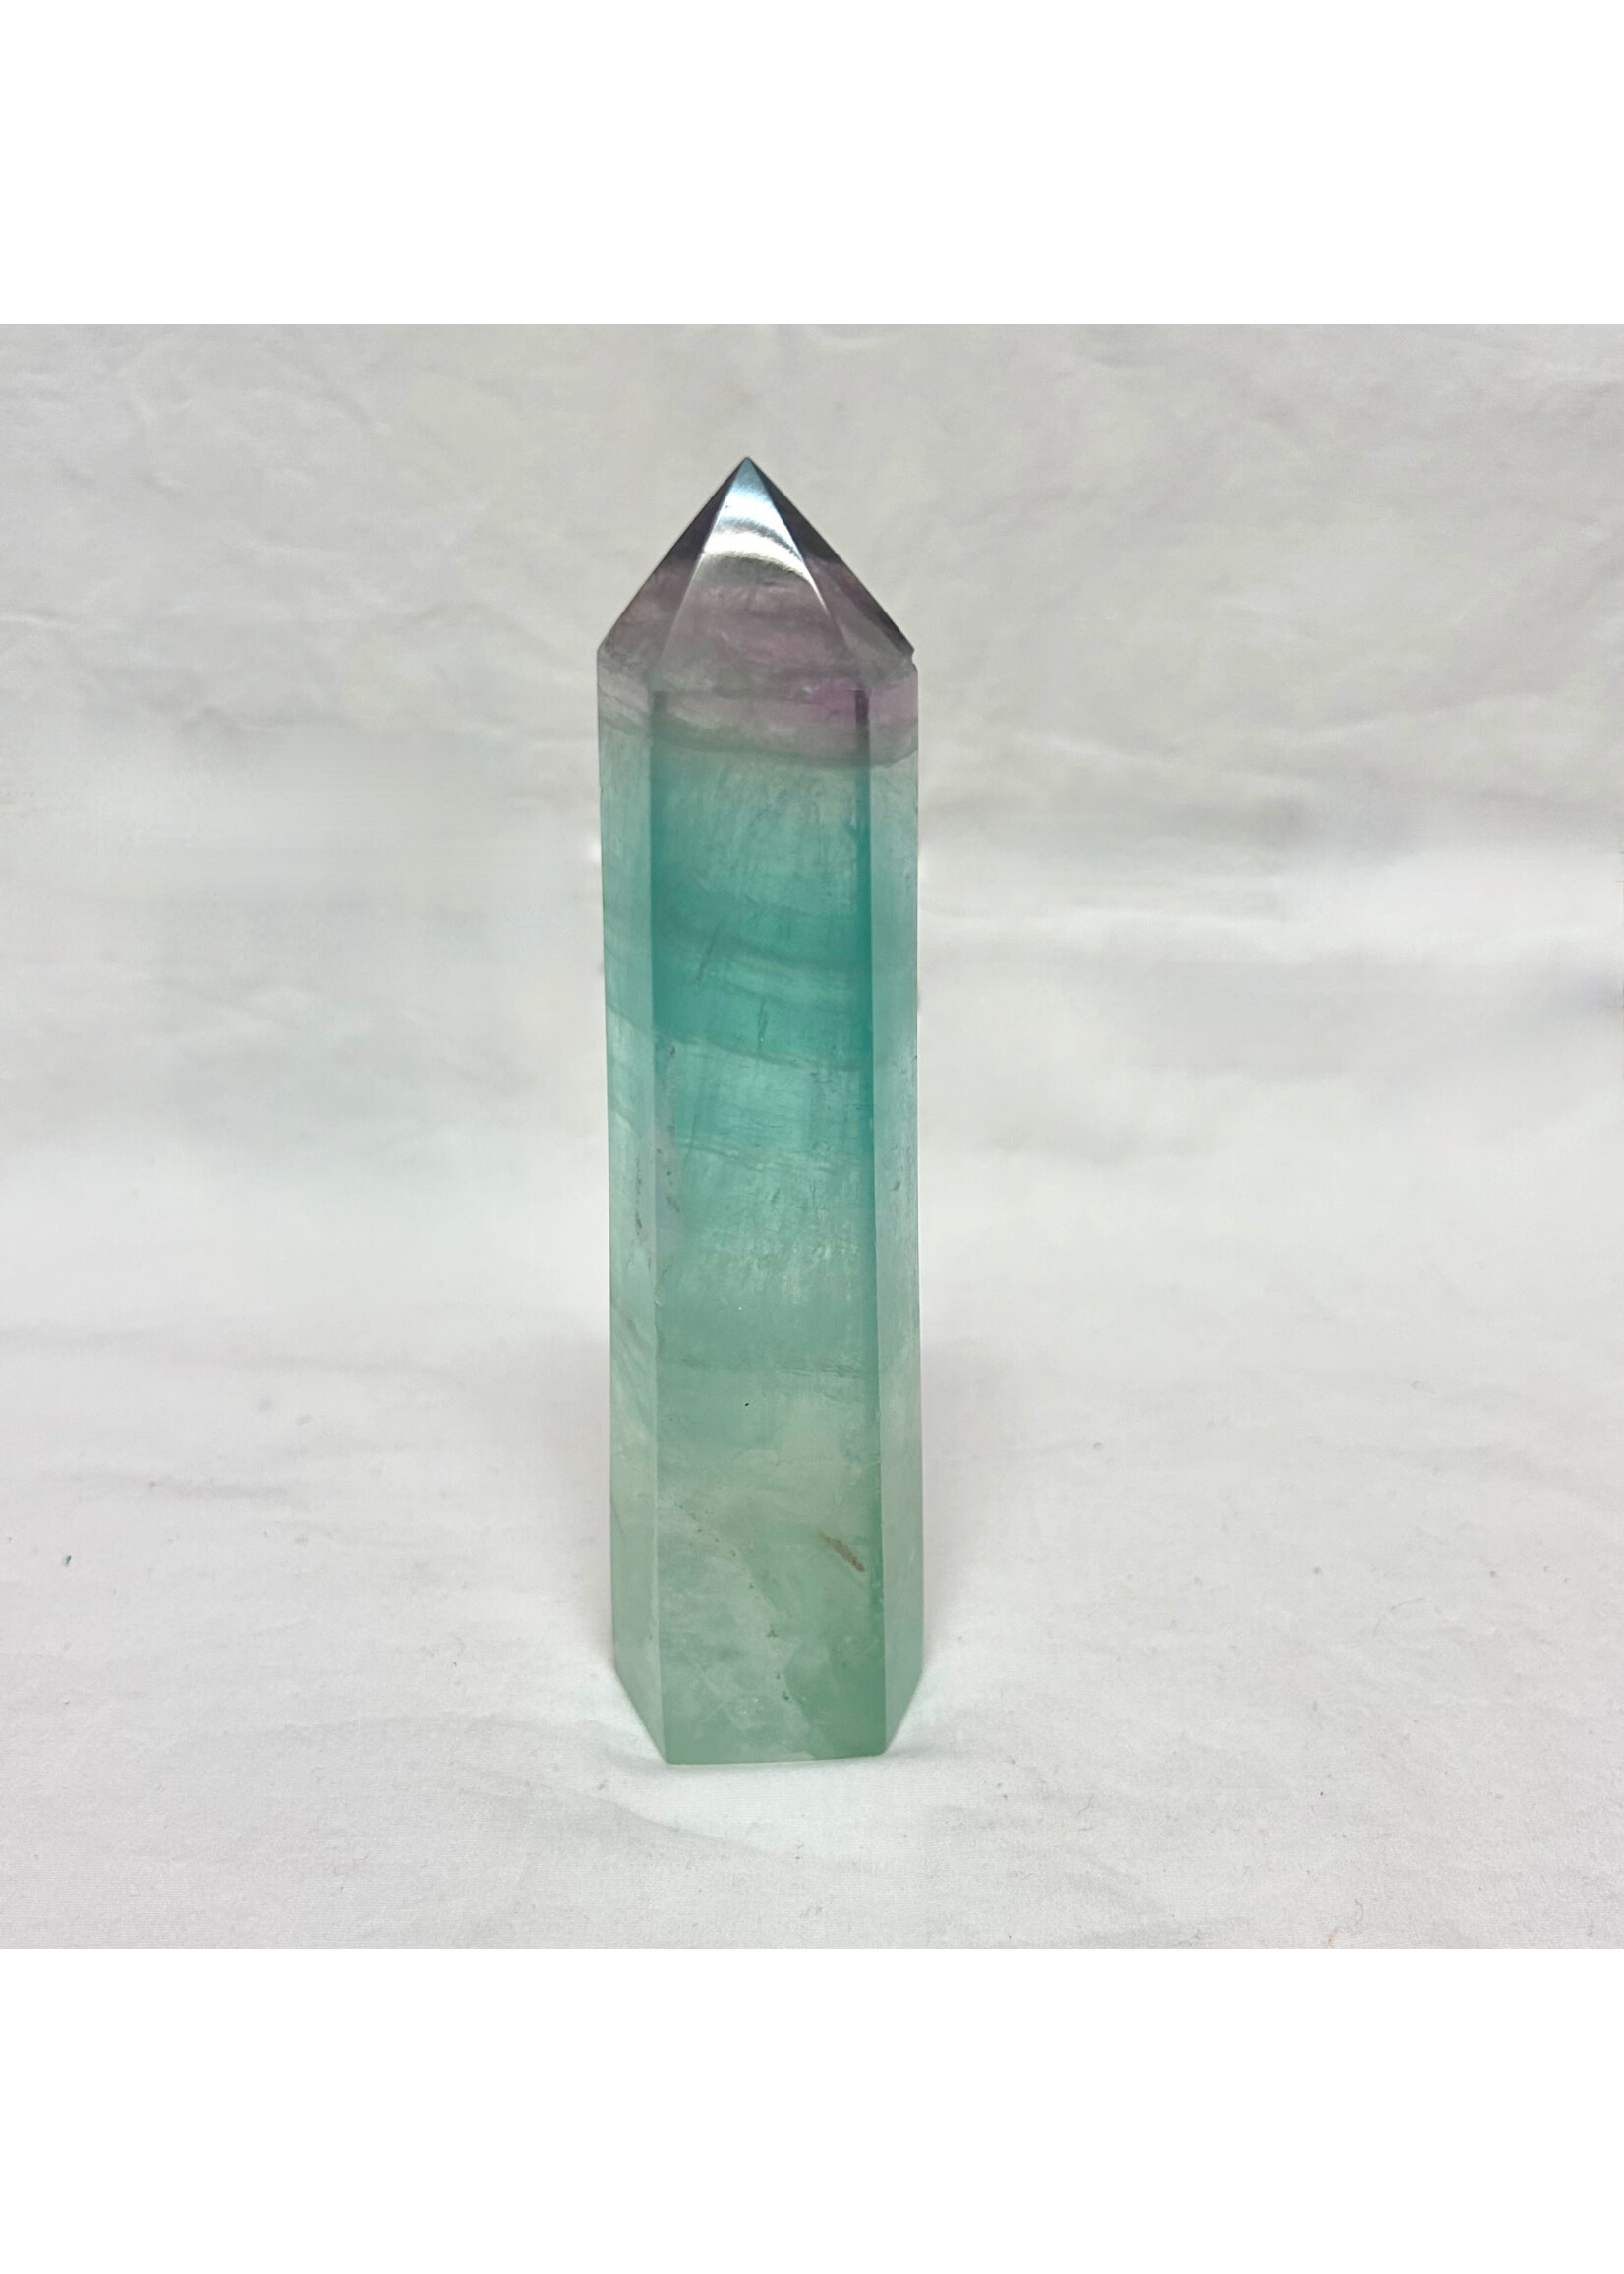 Green and Purple Fluorite Generators for a clear mind